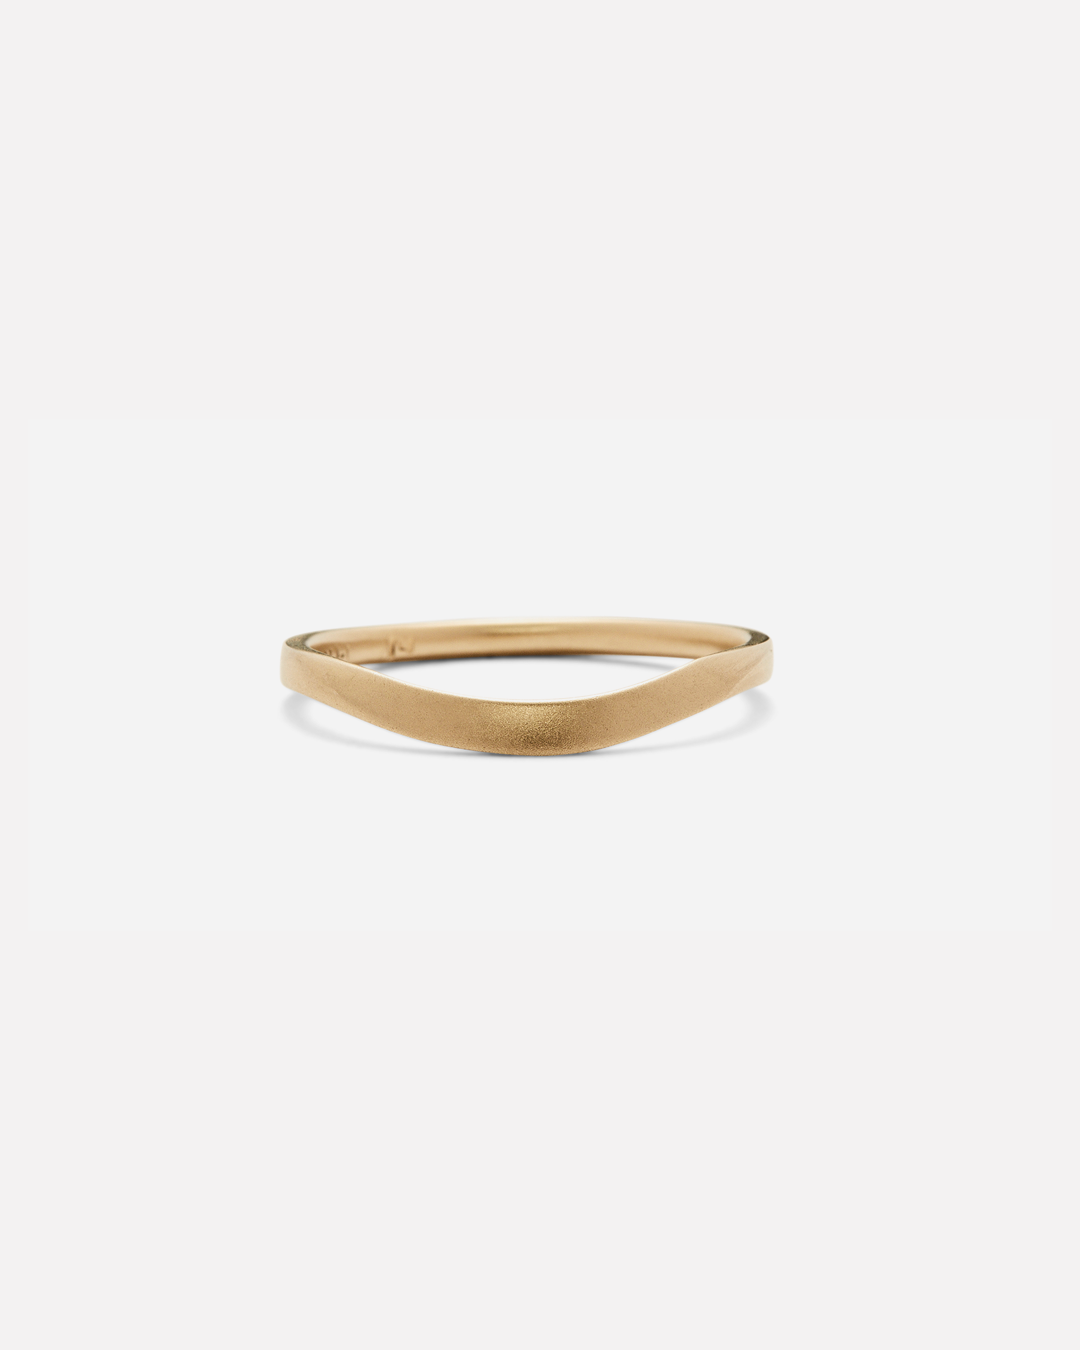 U Band / Small By Hiroyo in Wedding Bands Category